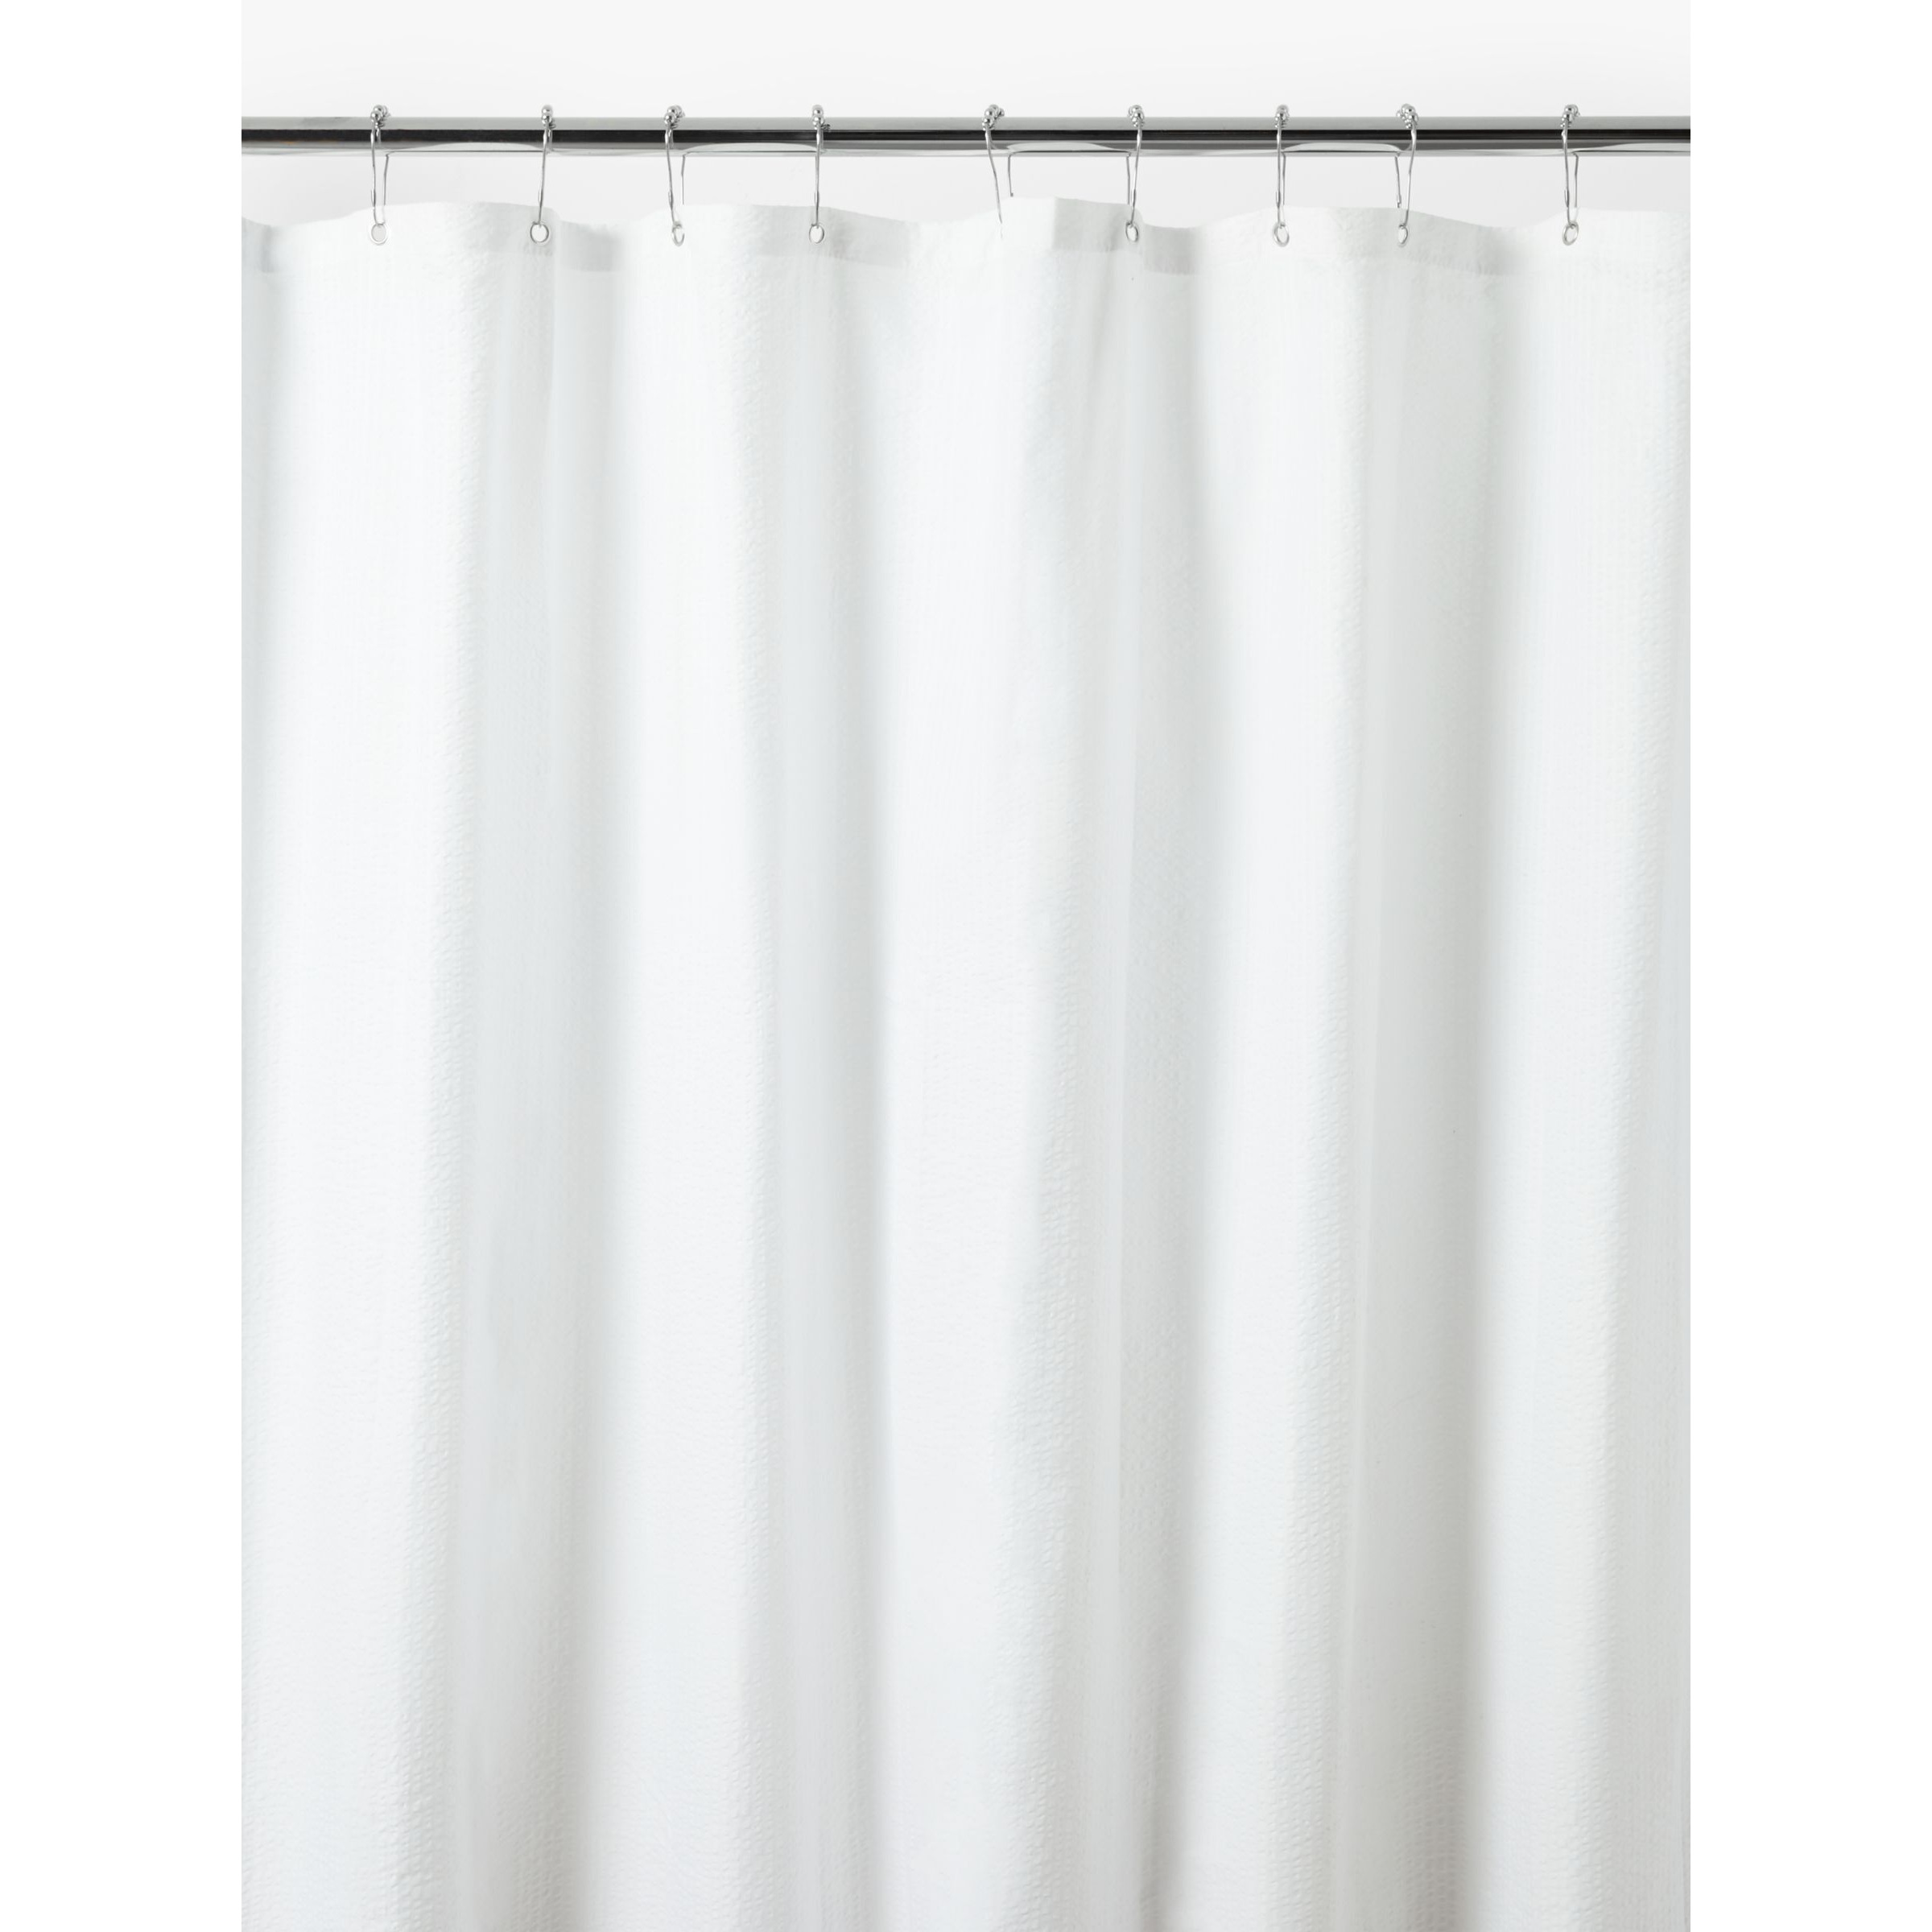 John Lewis Textured Seersucker Recycled Polyester Shower Curtain - image 1